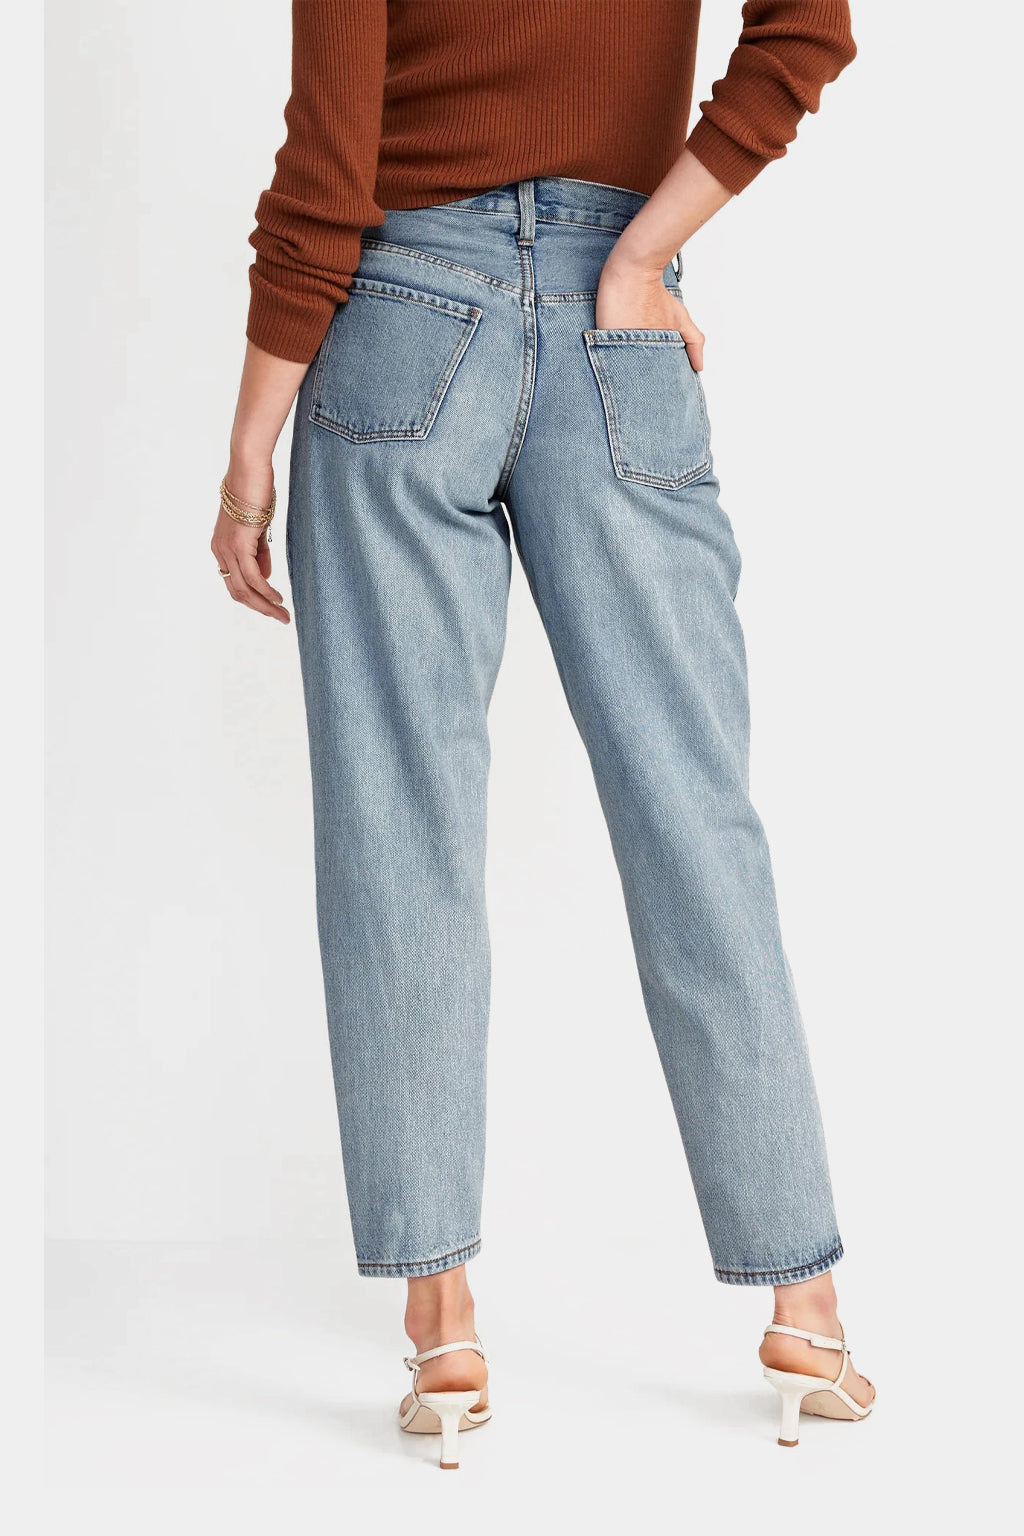 Old Navy - Extra High-Waisted Non-Stretch Balloon Jeans for Women